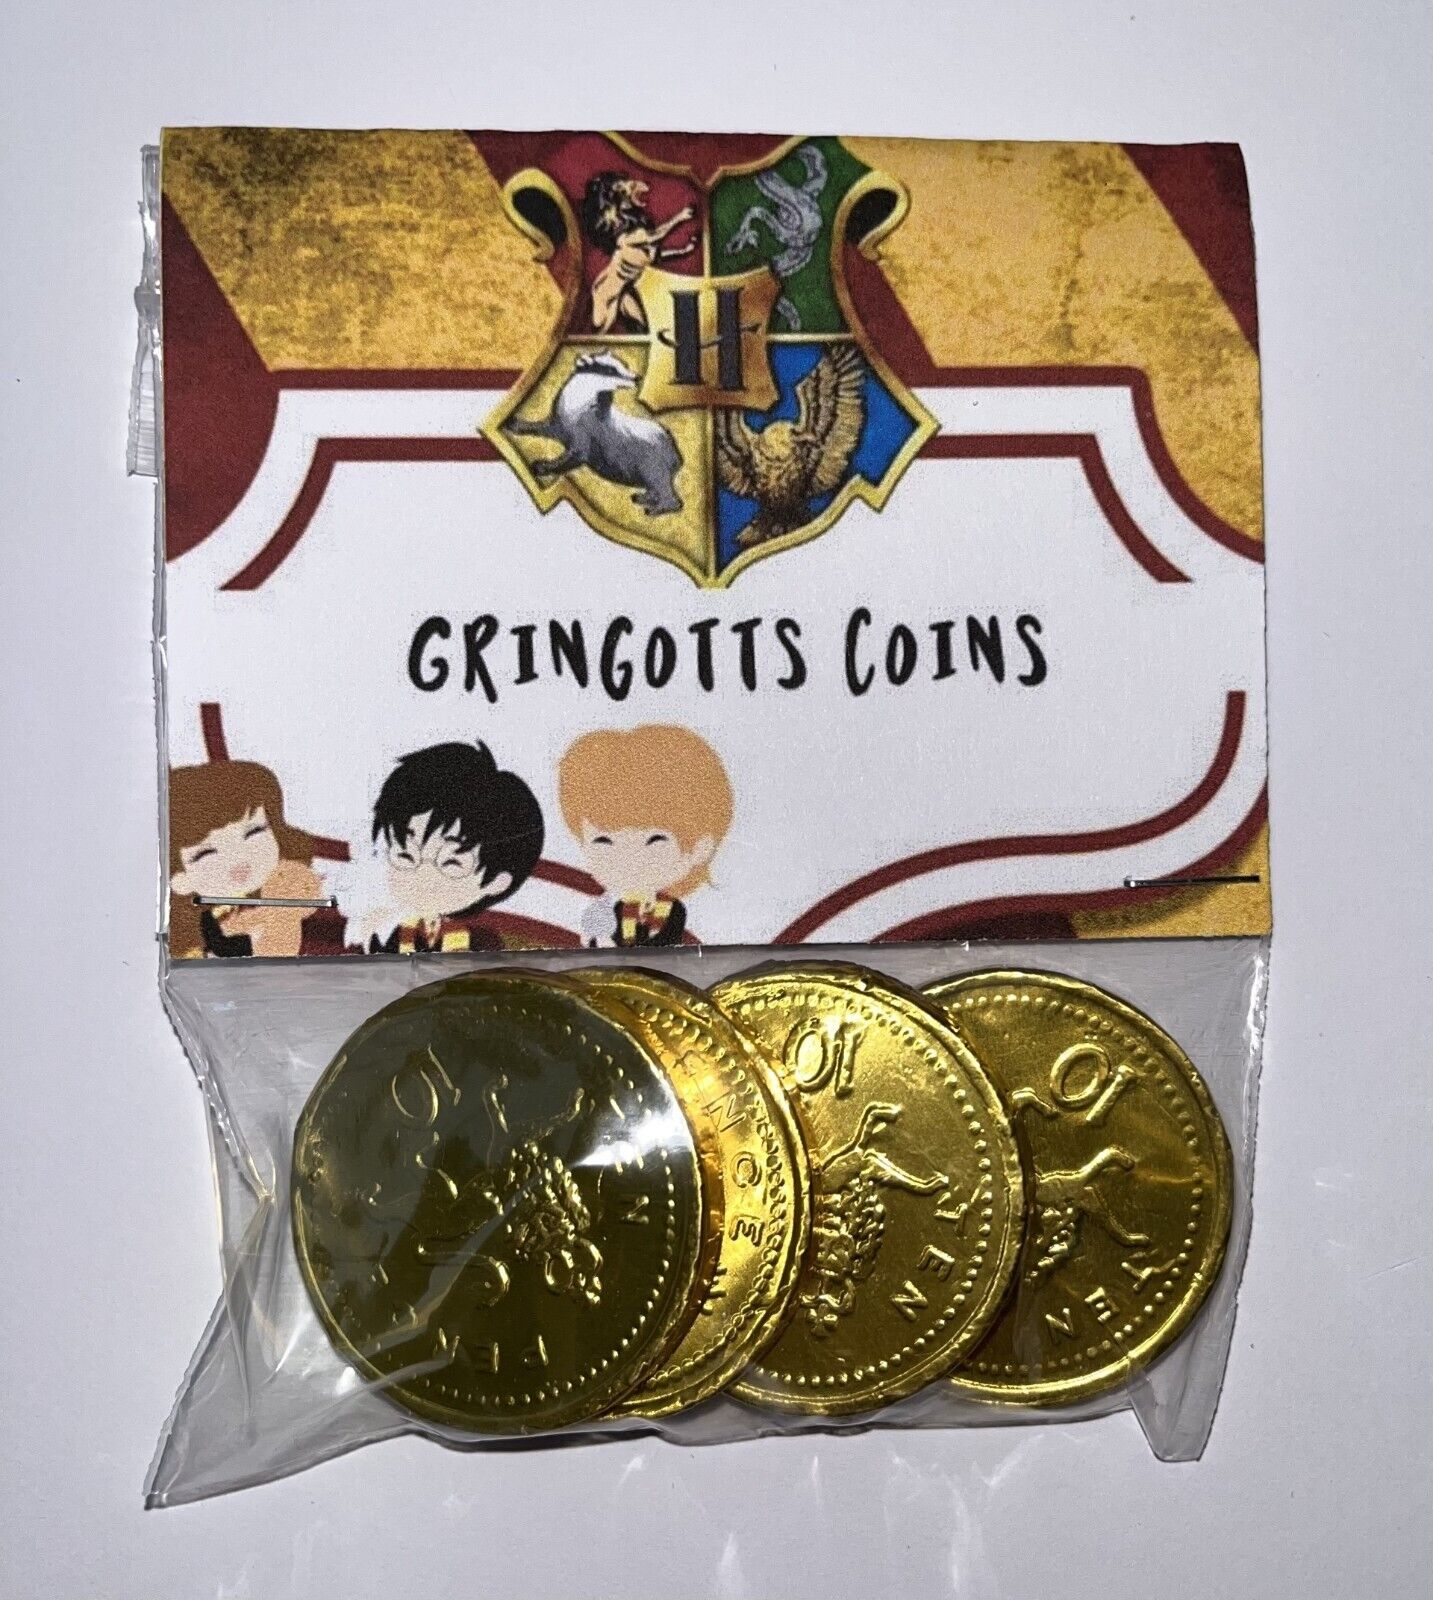 Harry Potter Wizard Sweet Treat Bag Party Favour Gift Snakes Coins Frogs Snails